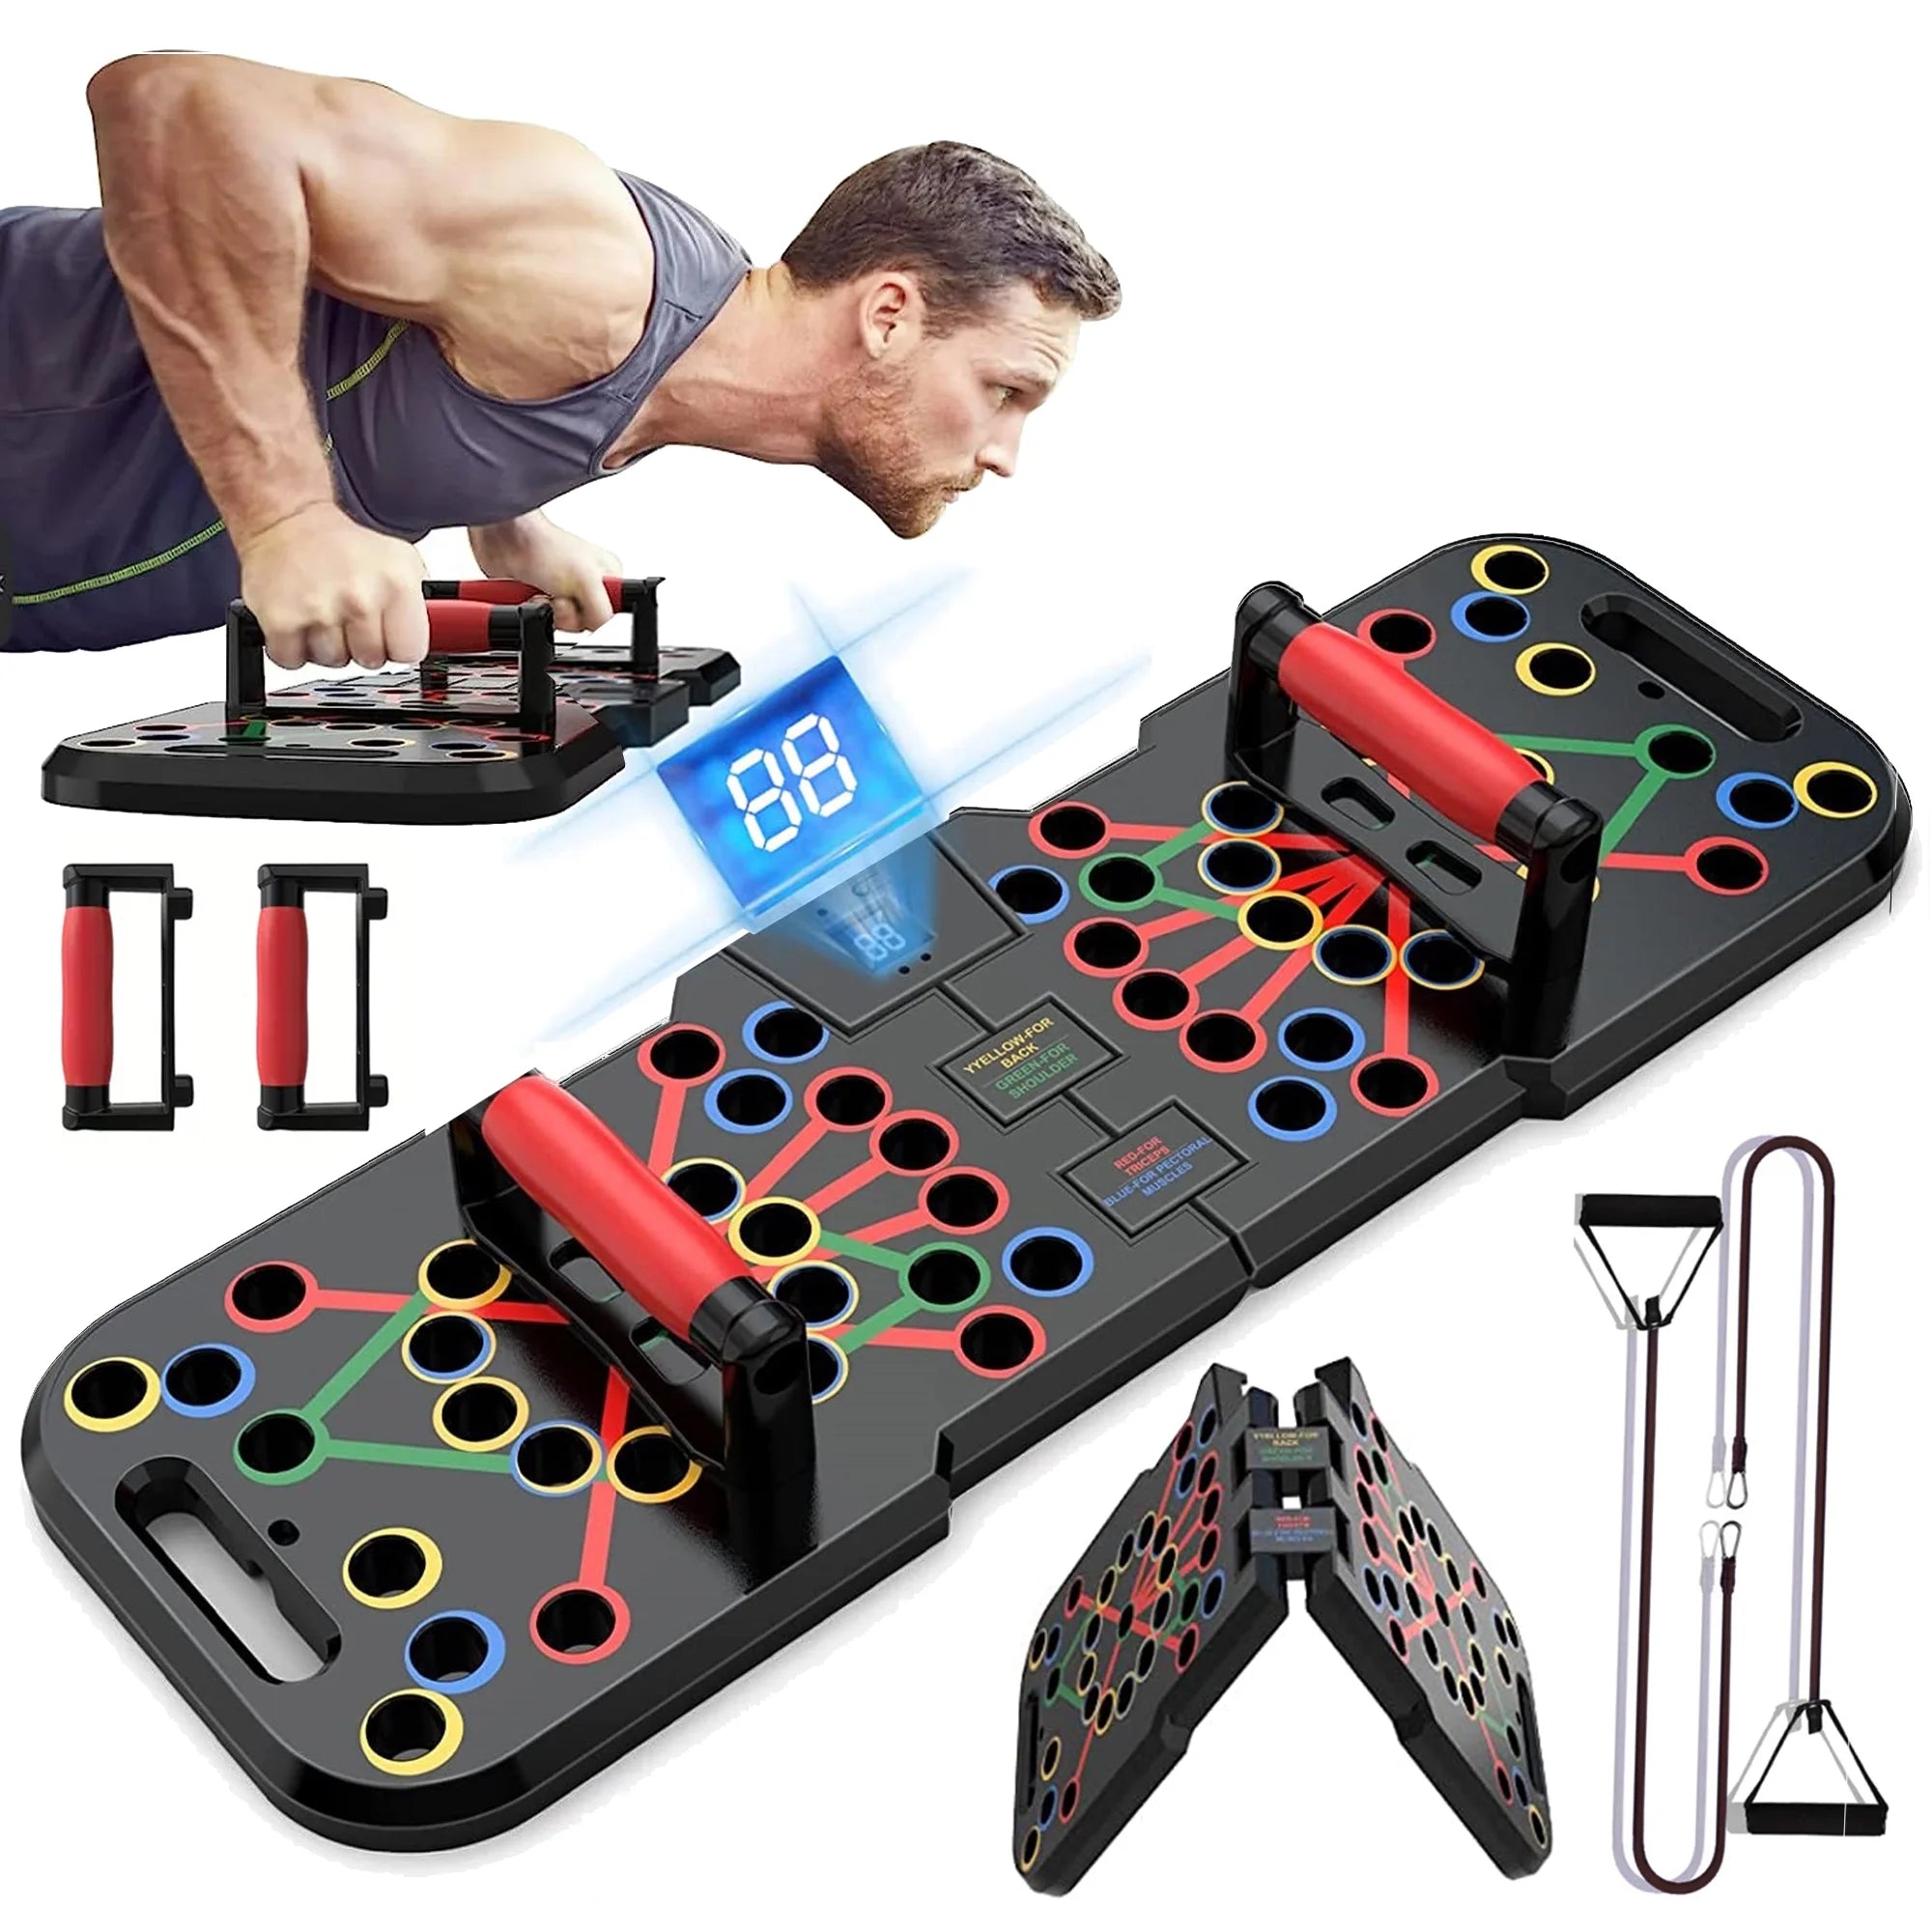 Push up Board with Smart Count, Multi-Function 60 in 1 Push up Bar (Foldable & Portable)